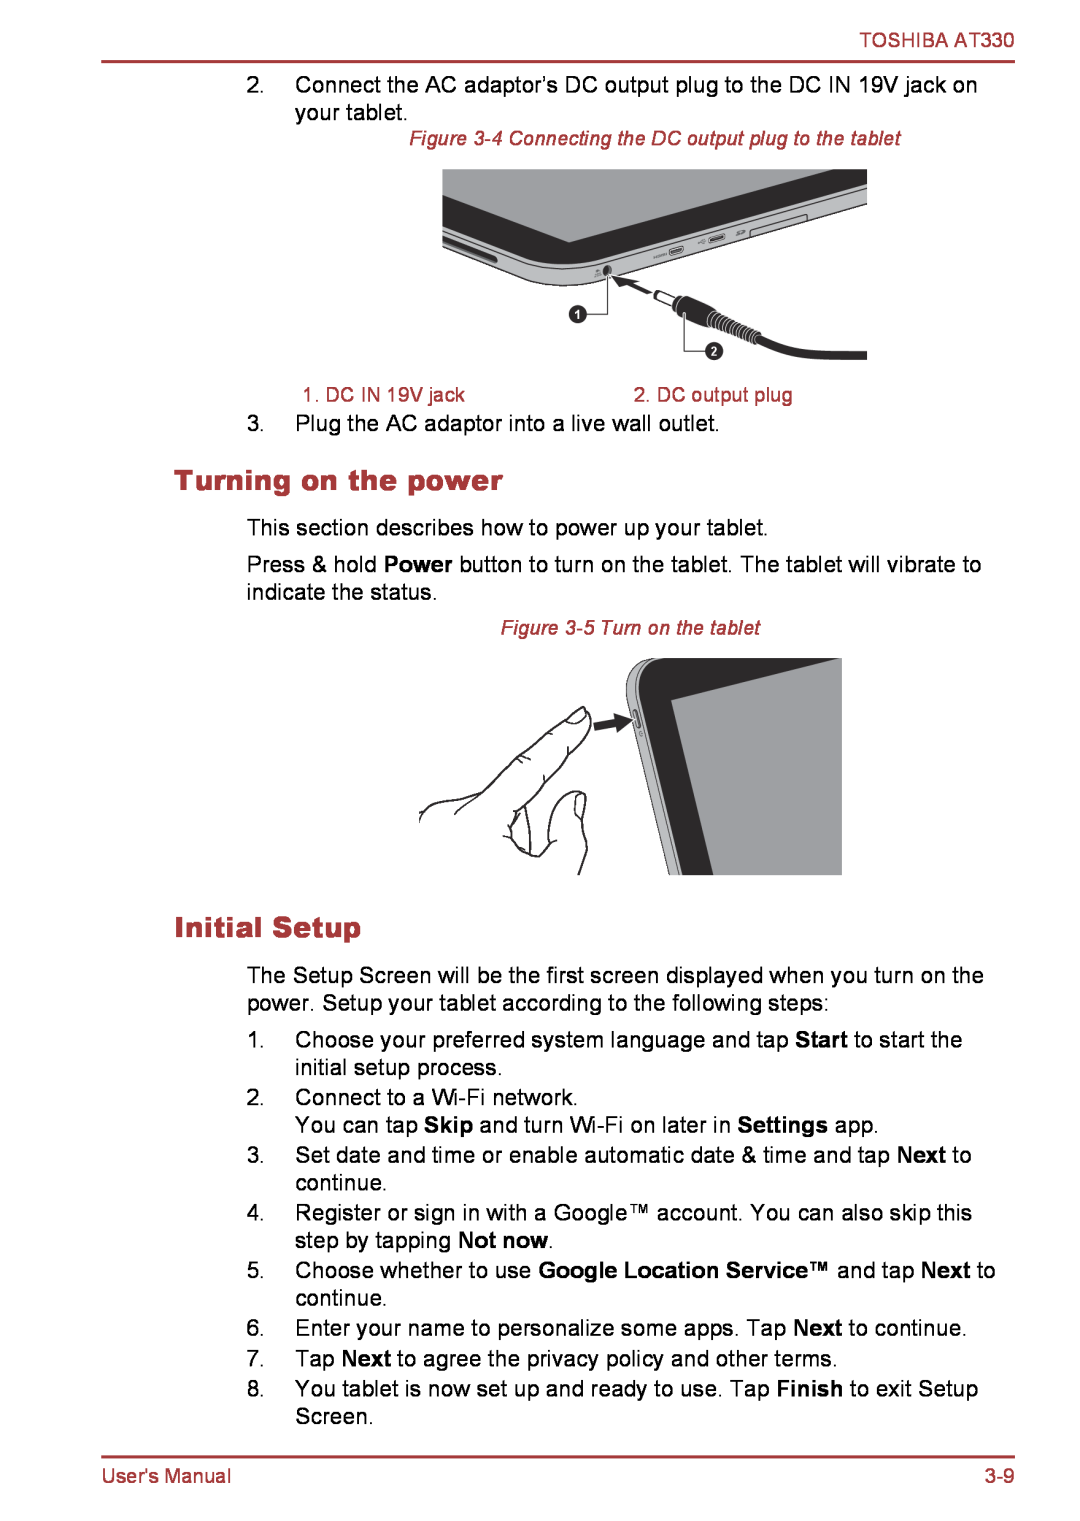 Toshiba at330 user manual Turning on the power, Initial Setup 